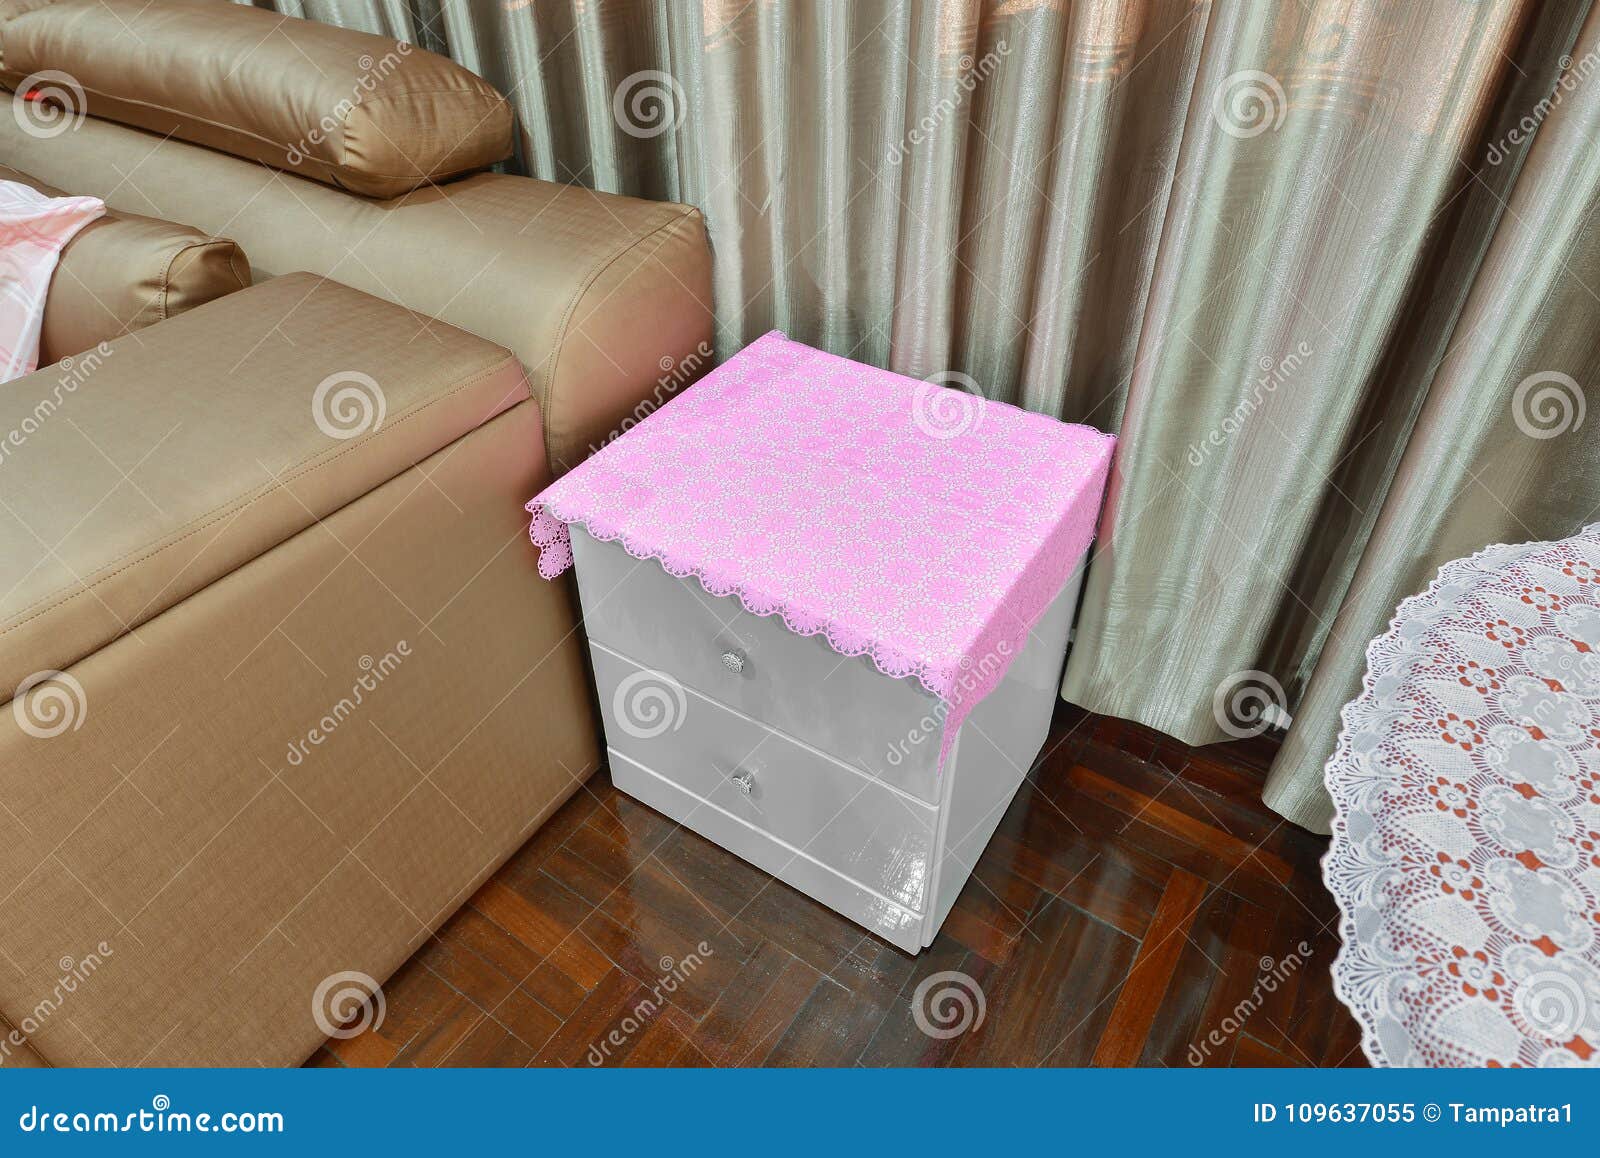 Empty Nightstand In Bedroom With Pink Fabric Covered Interior D